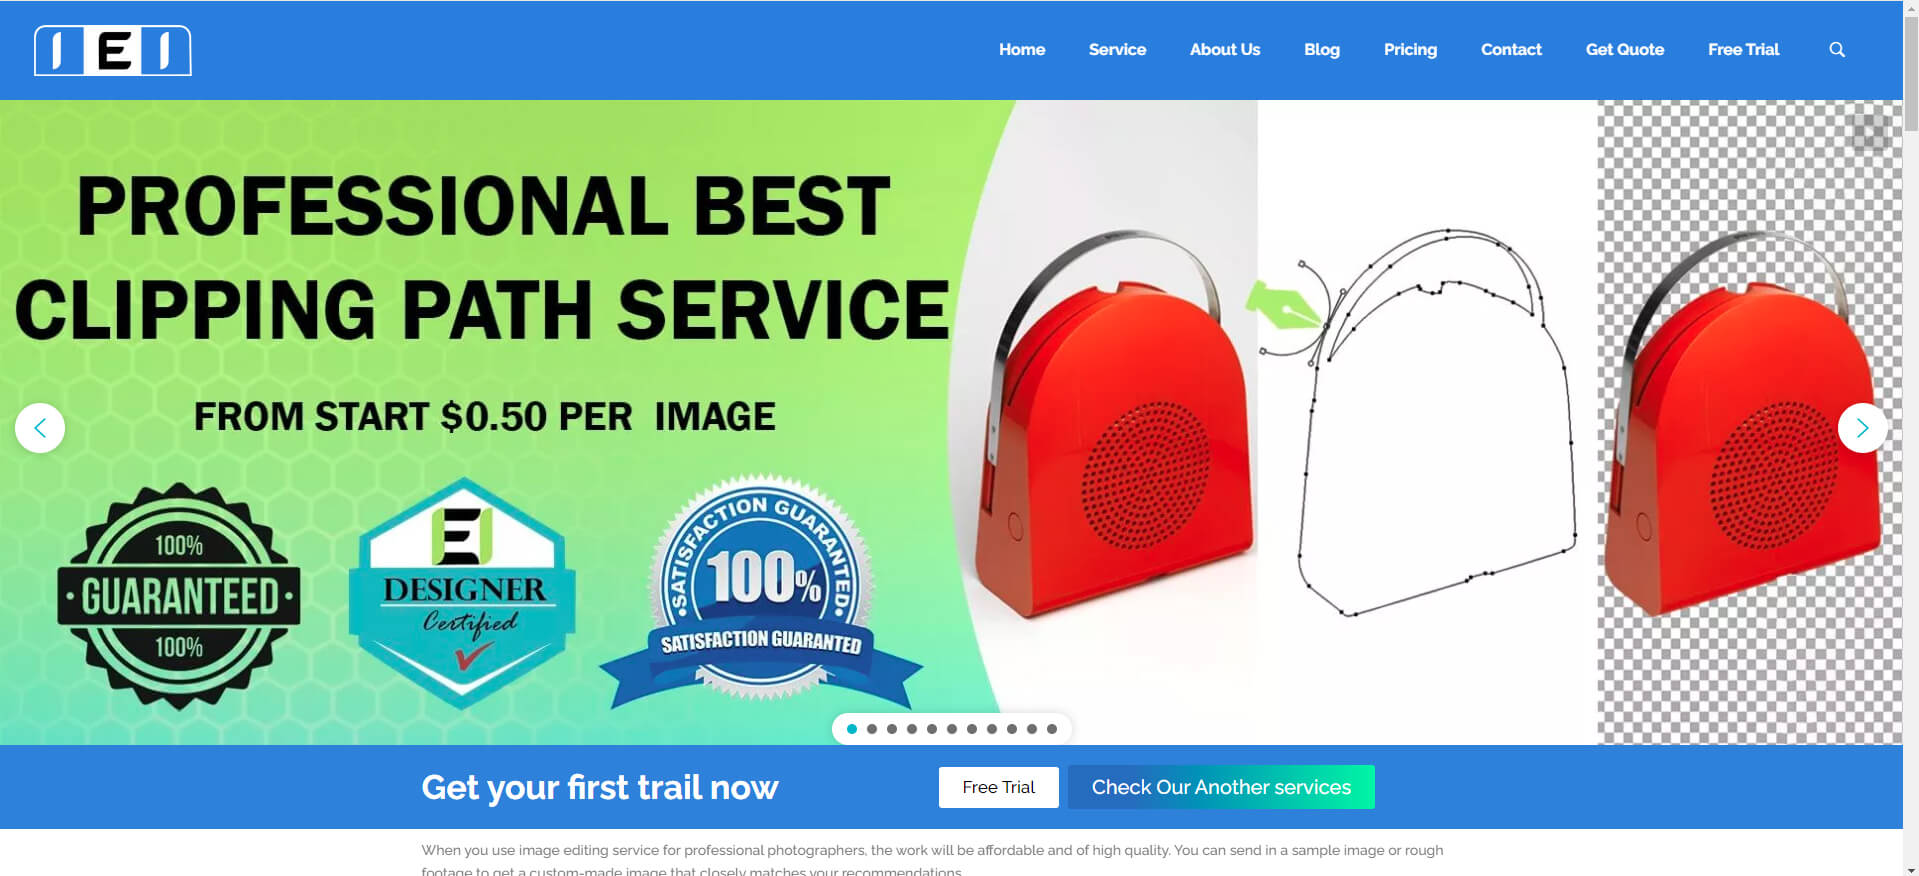 best clipping path service provider imageexpertindia.com